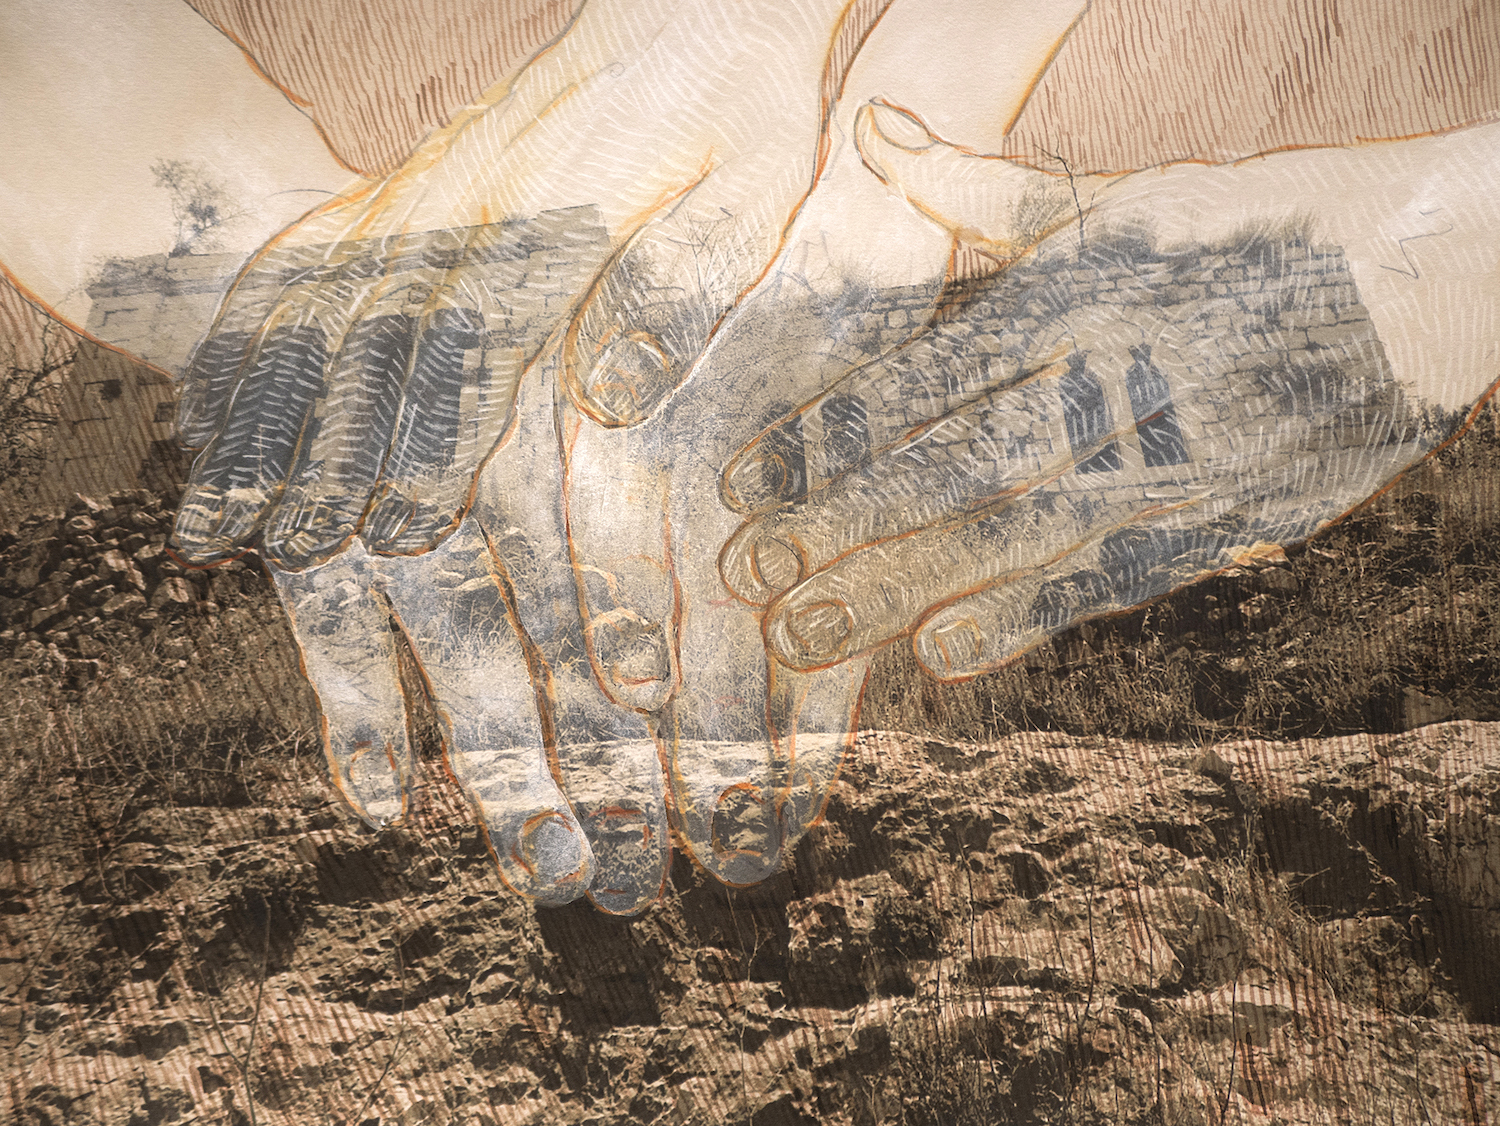 John Halaka Ghosts of Presence-Bodies of Abscence. Hands of Survivors art piece depicting hands overlayed on a native home